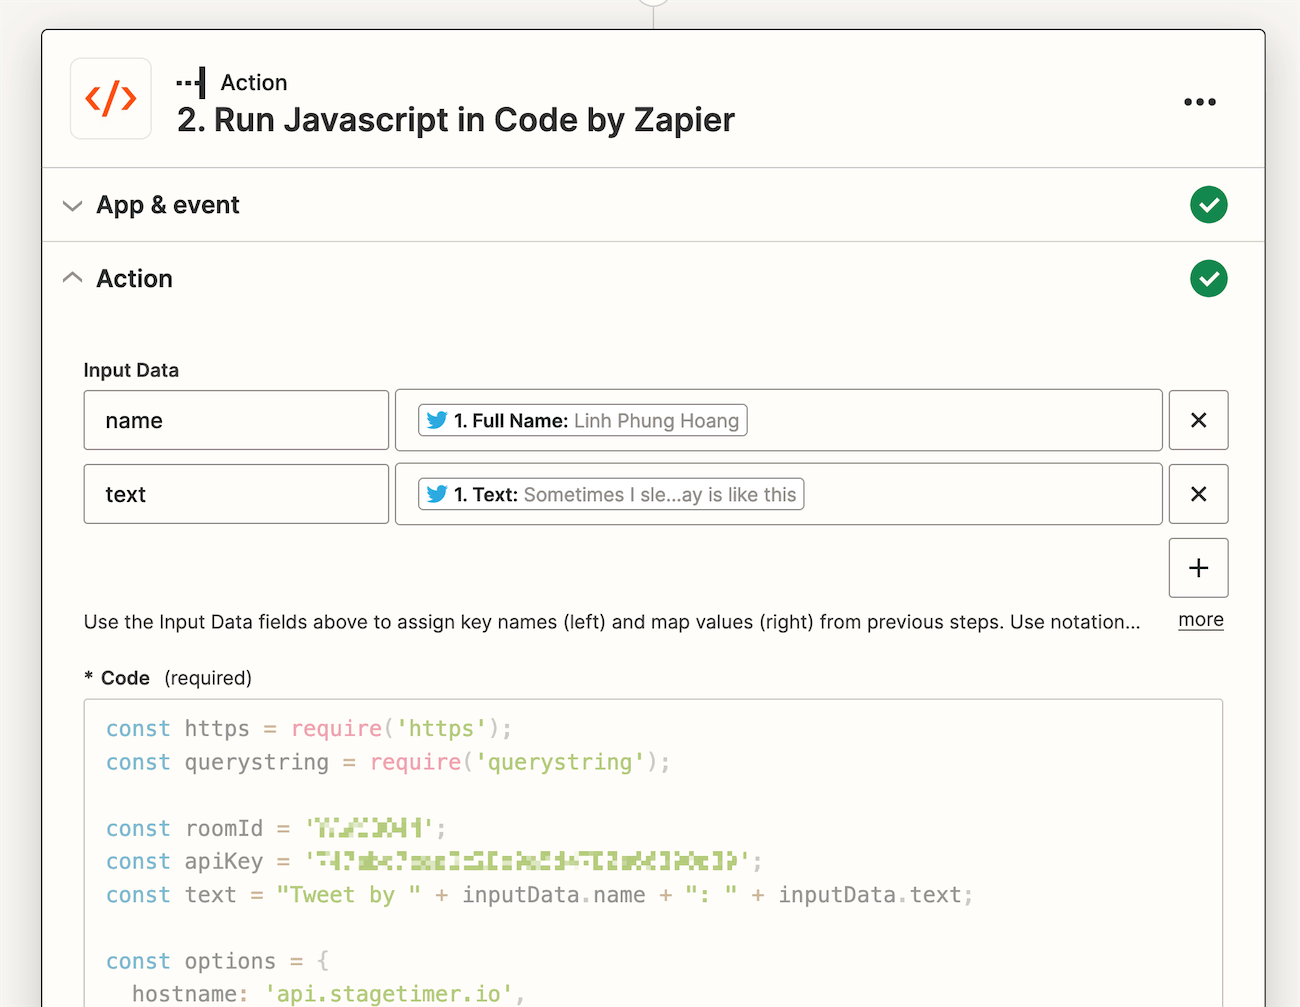 Zapier's code box filled with the Javascript code